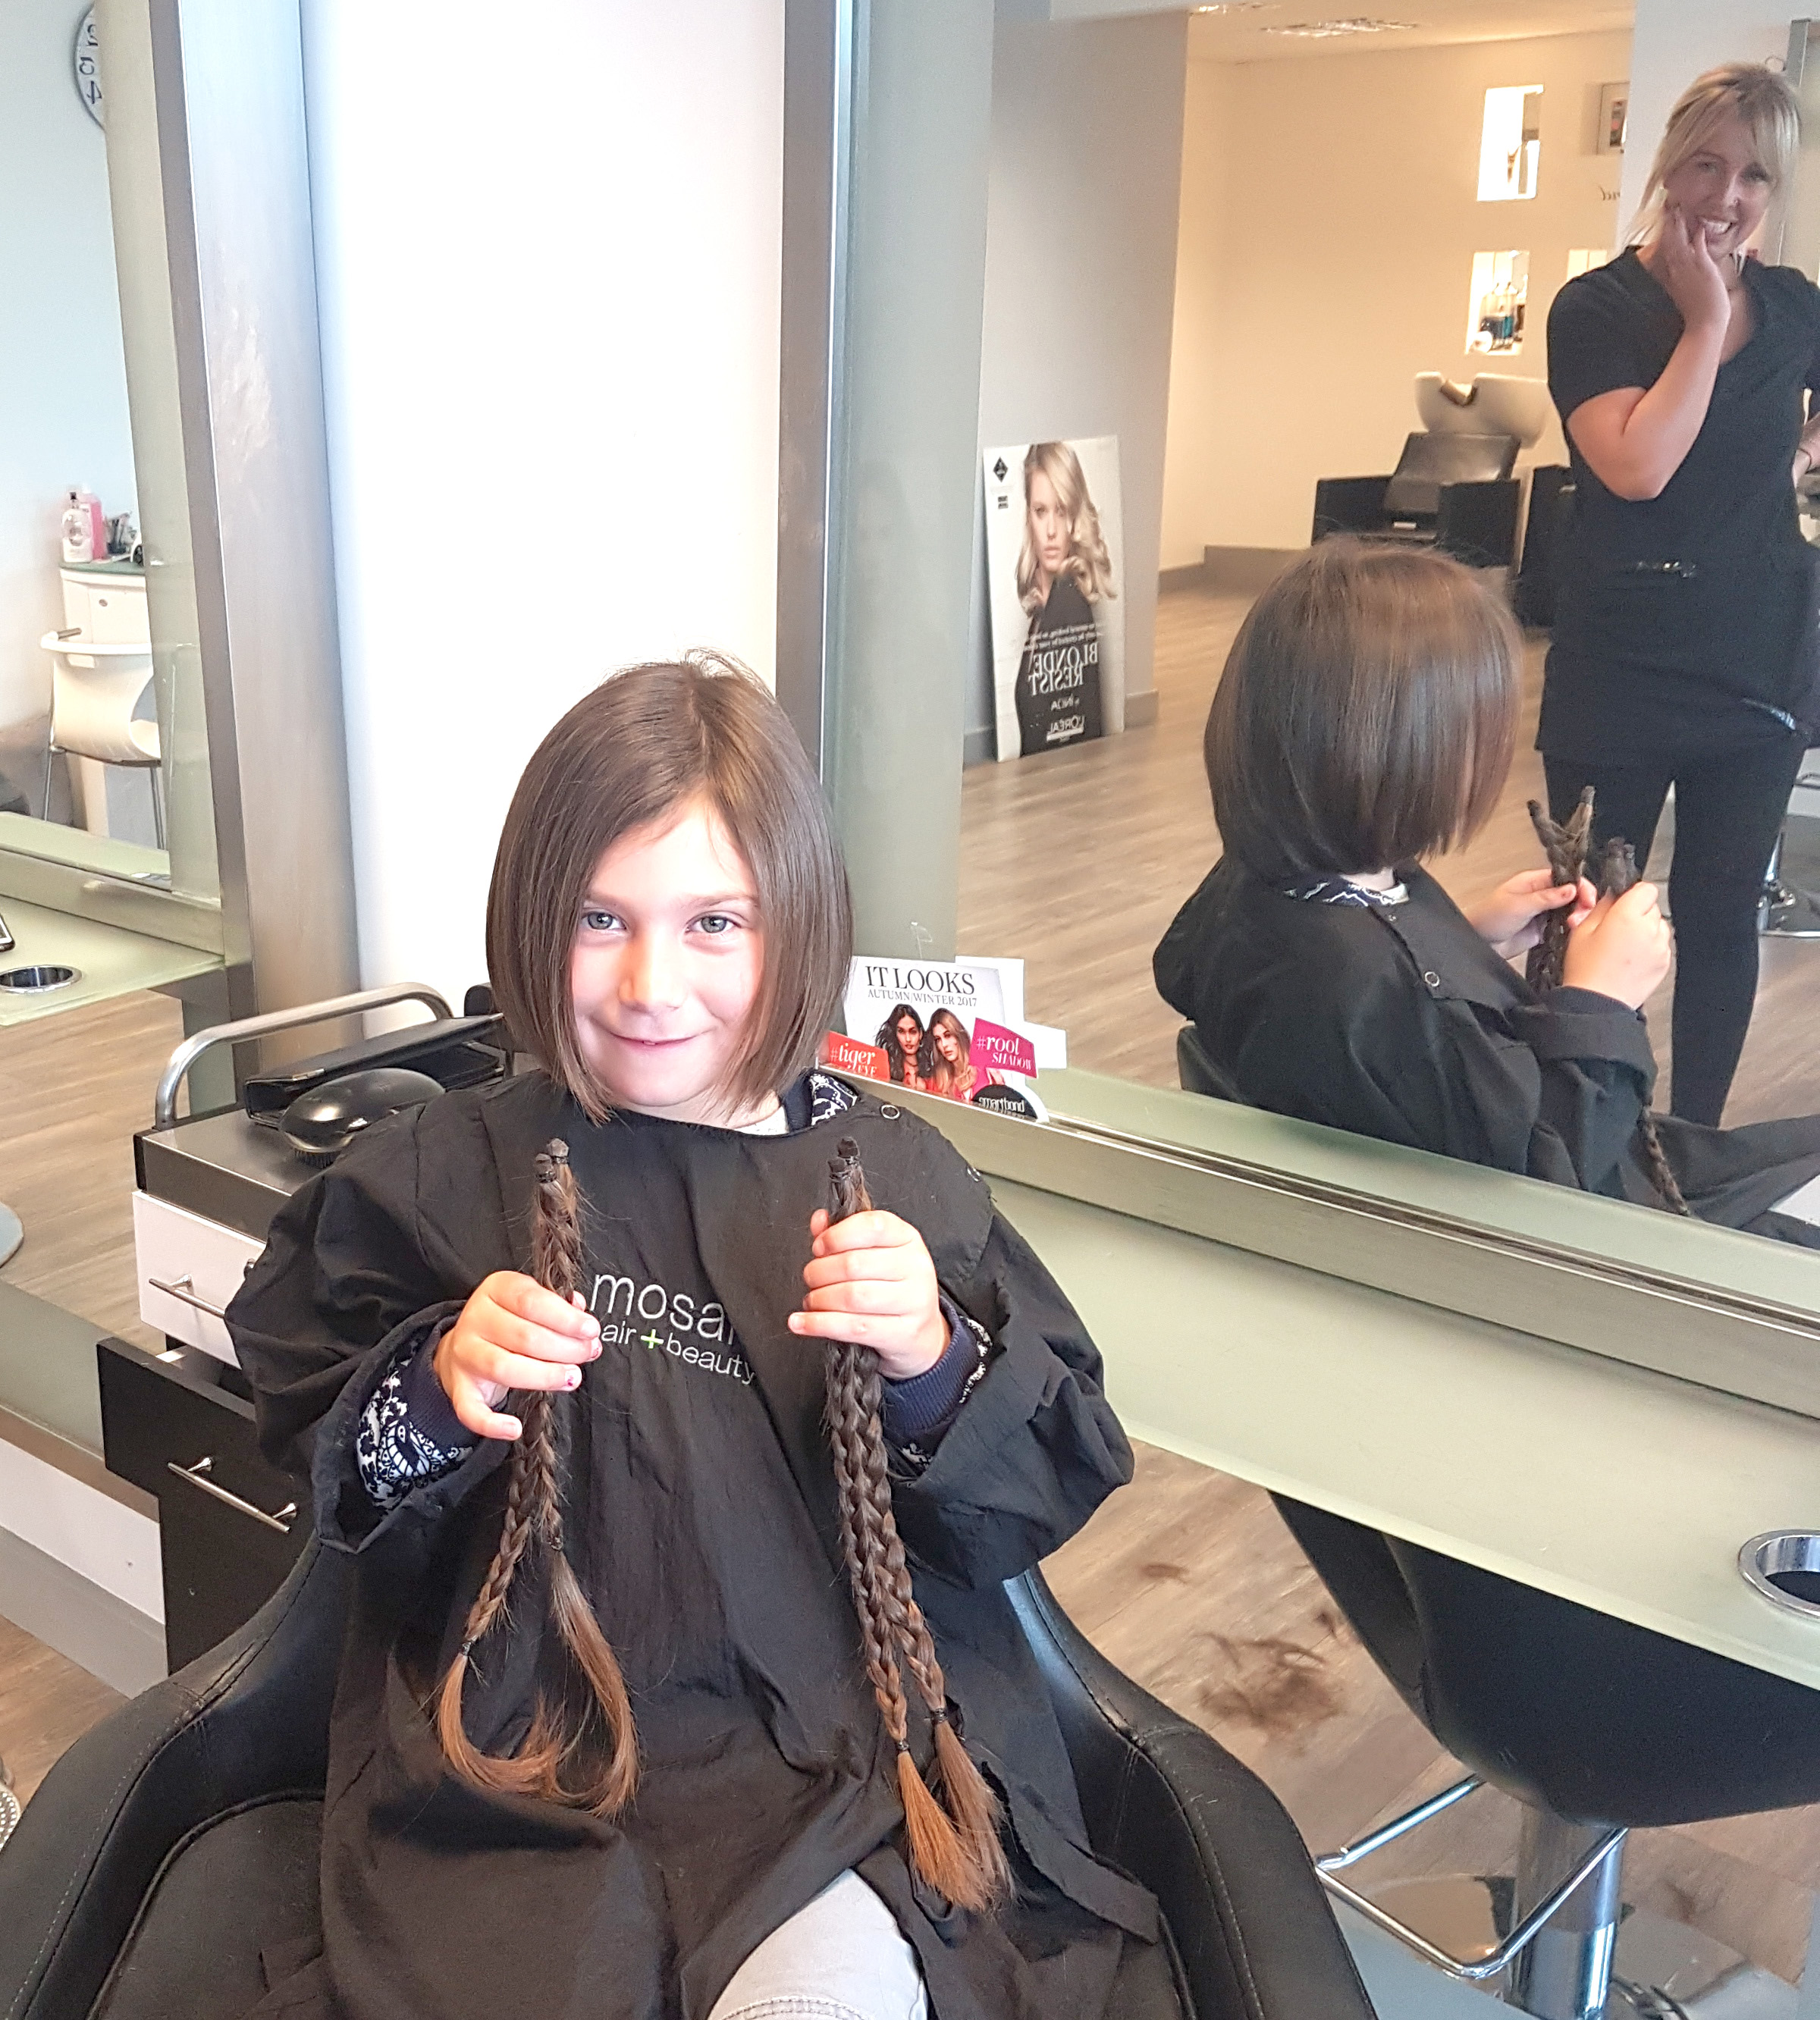 6 year old Donates Long Plaits to Charity